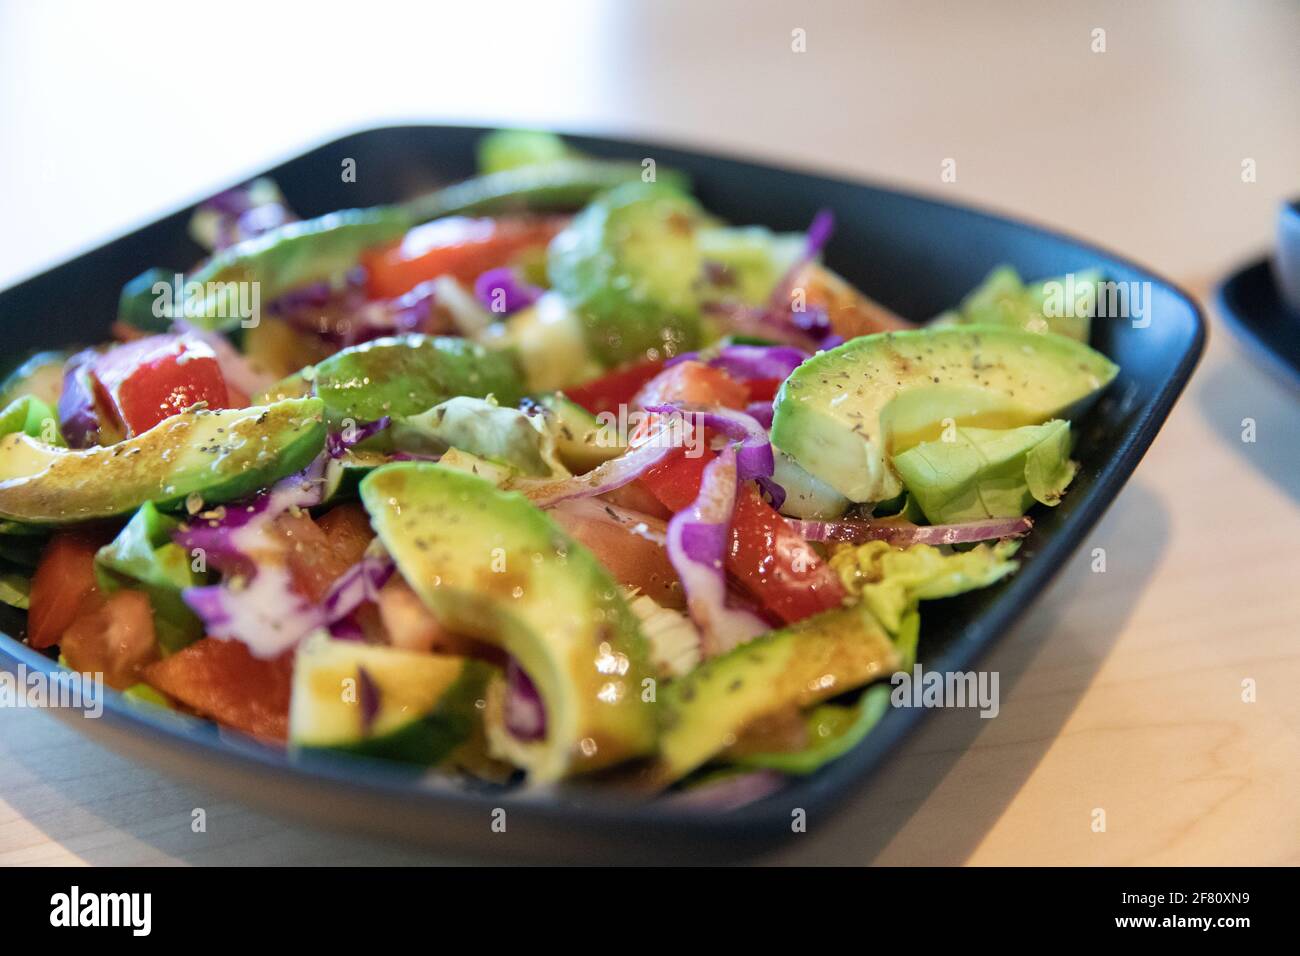 Fresh avocado salad with onions and other veggies and dressing in a square plate Stock Photo